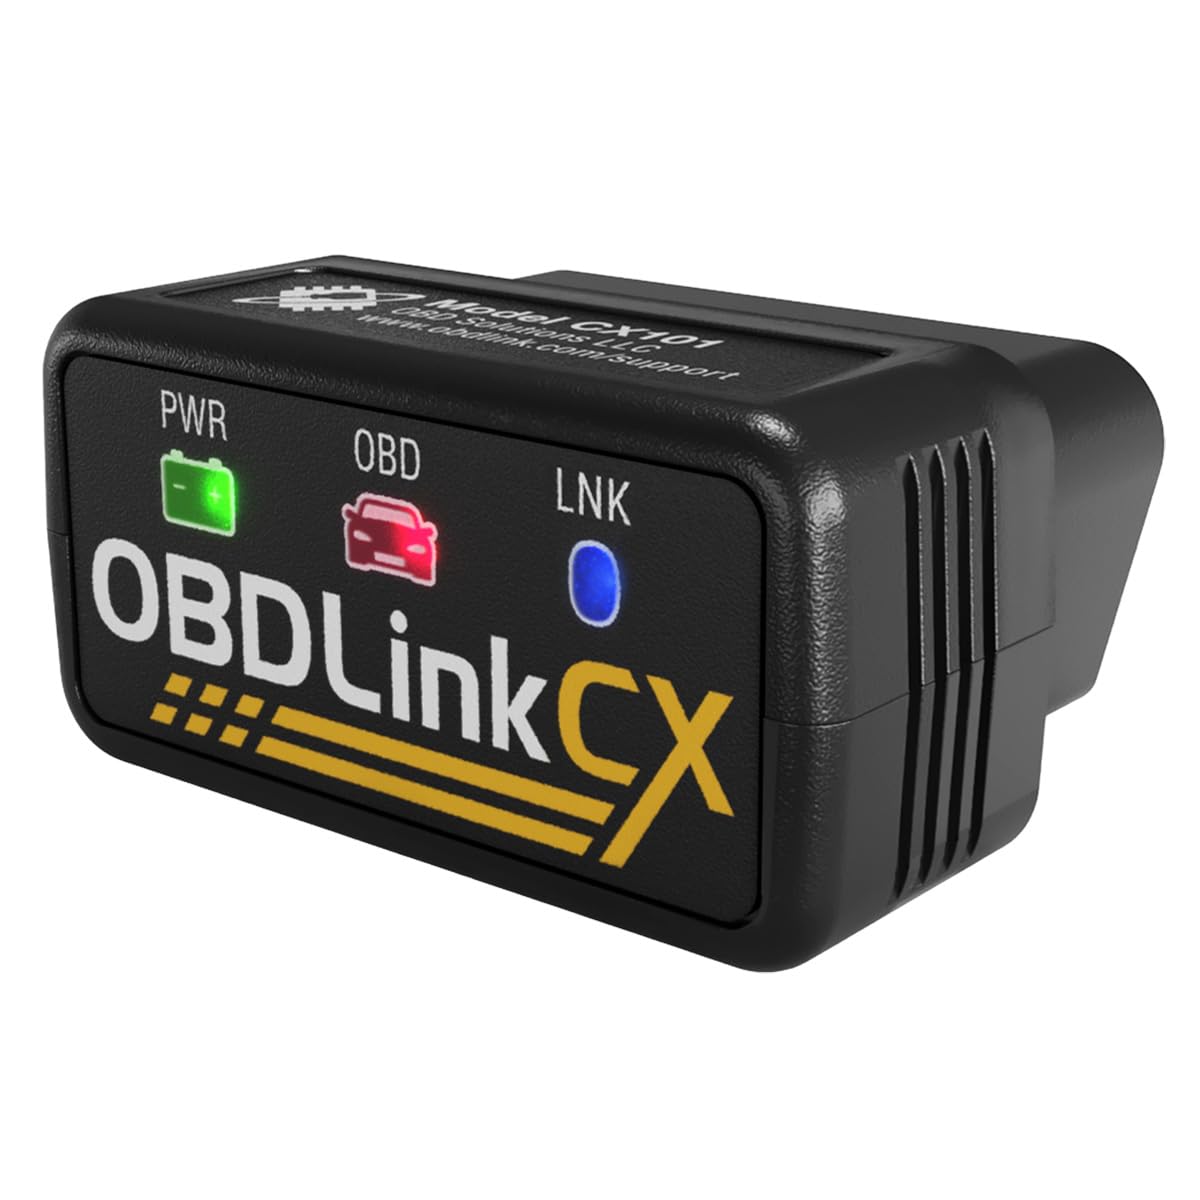 OBDLINK CX Bimmercode Bluetooth 5.1 BLE OBD2 Adapter for BMW/Mini, Works with iPhone/iOS & Android, Car Coding, OBD II Diagnostic Scanner von OBDLINK